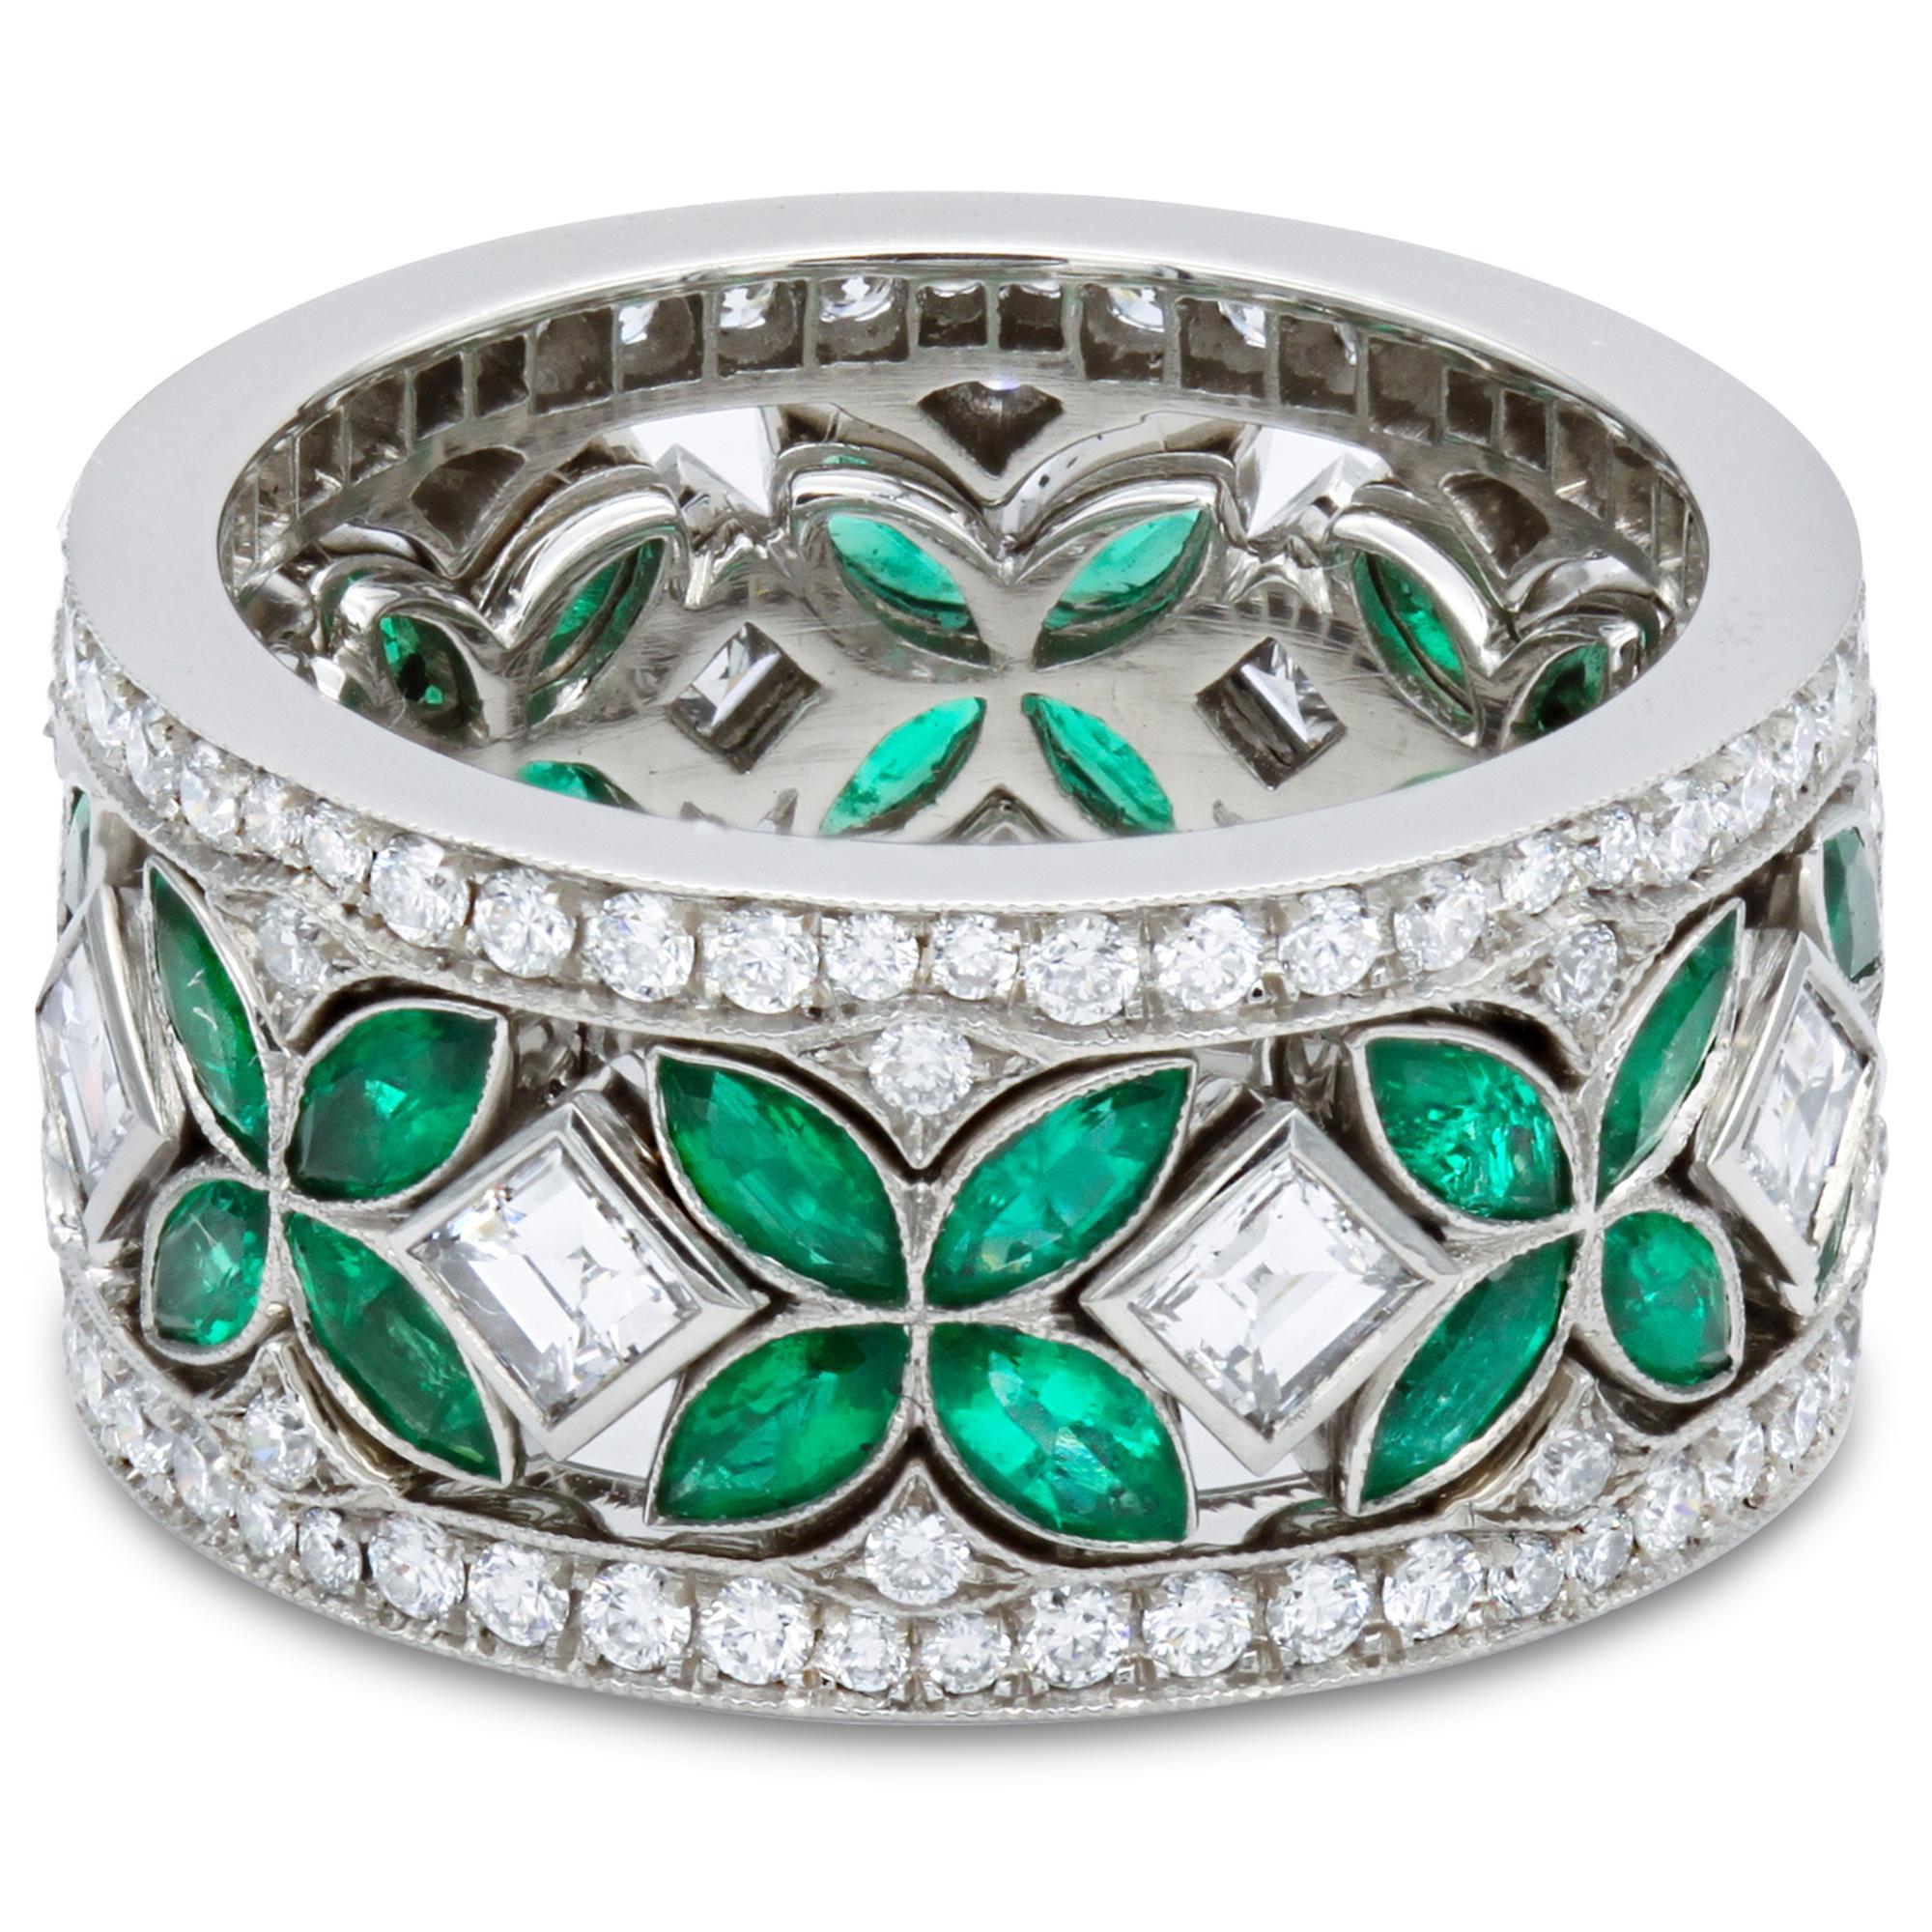 We take great pride in offering this fabulous platinum diamond eternity band that is actually three in one. The center row is a ring that sparkles all around with natural green emeralds and rare art deco carre cut diamonds. Seamlessly set in bezel